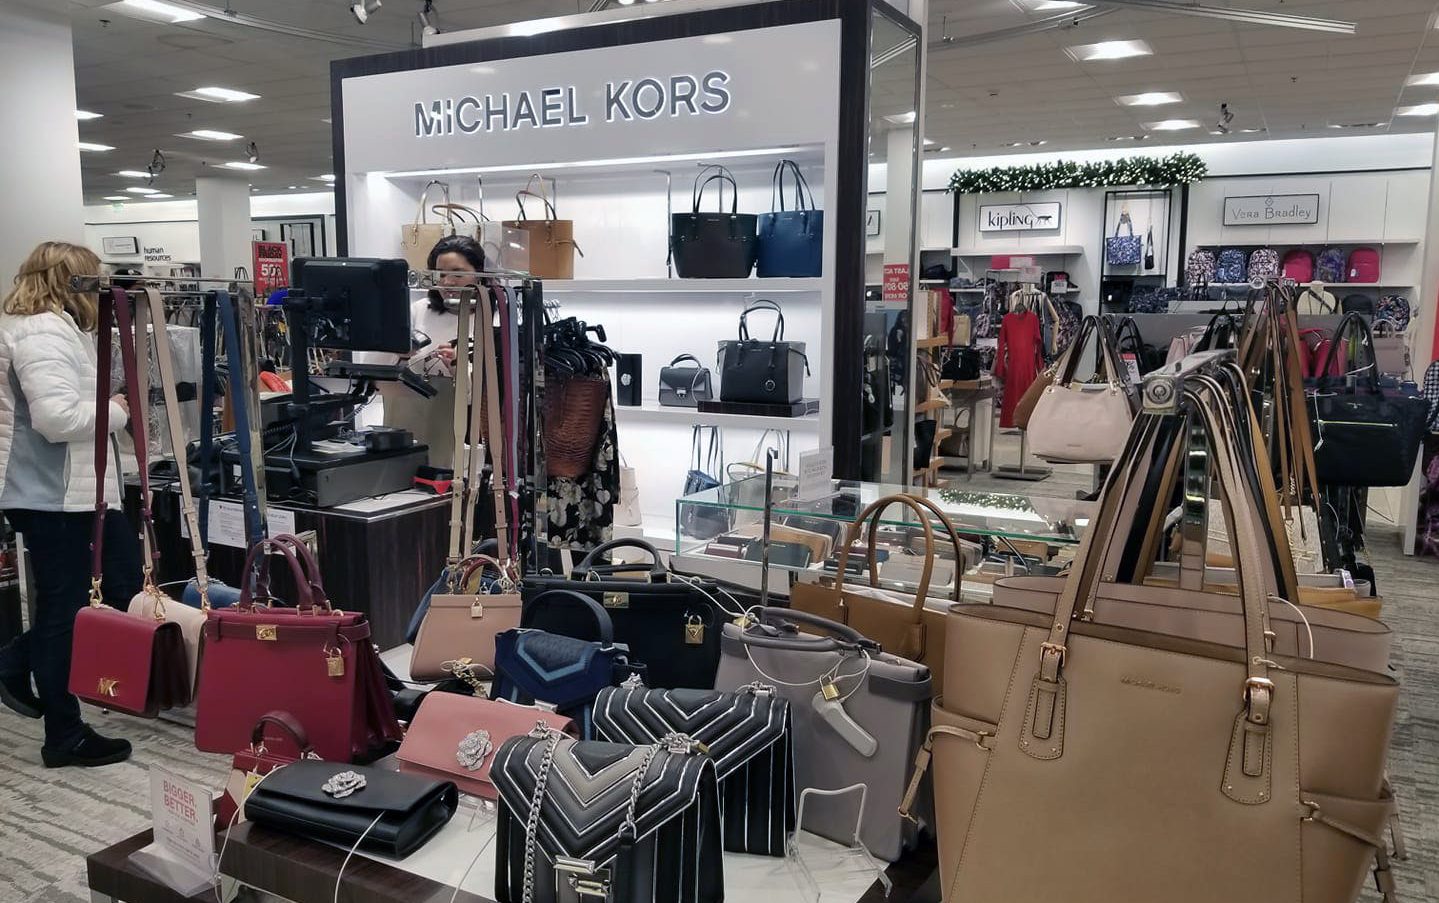 Michael Kors section in a retailer